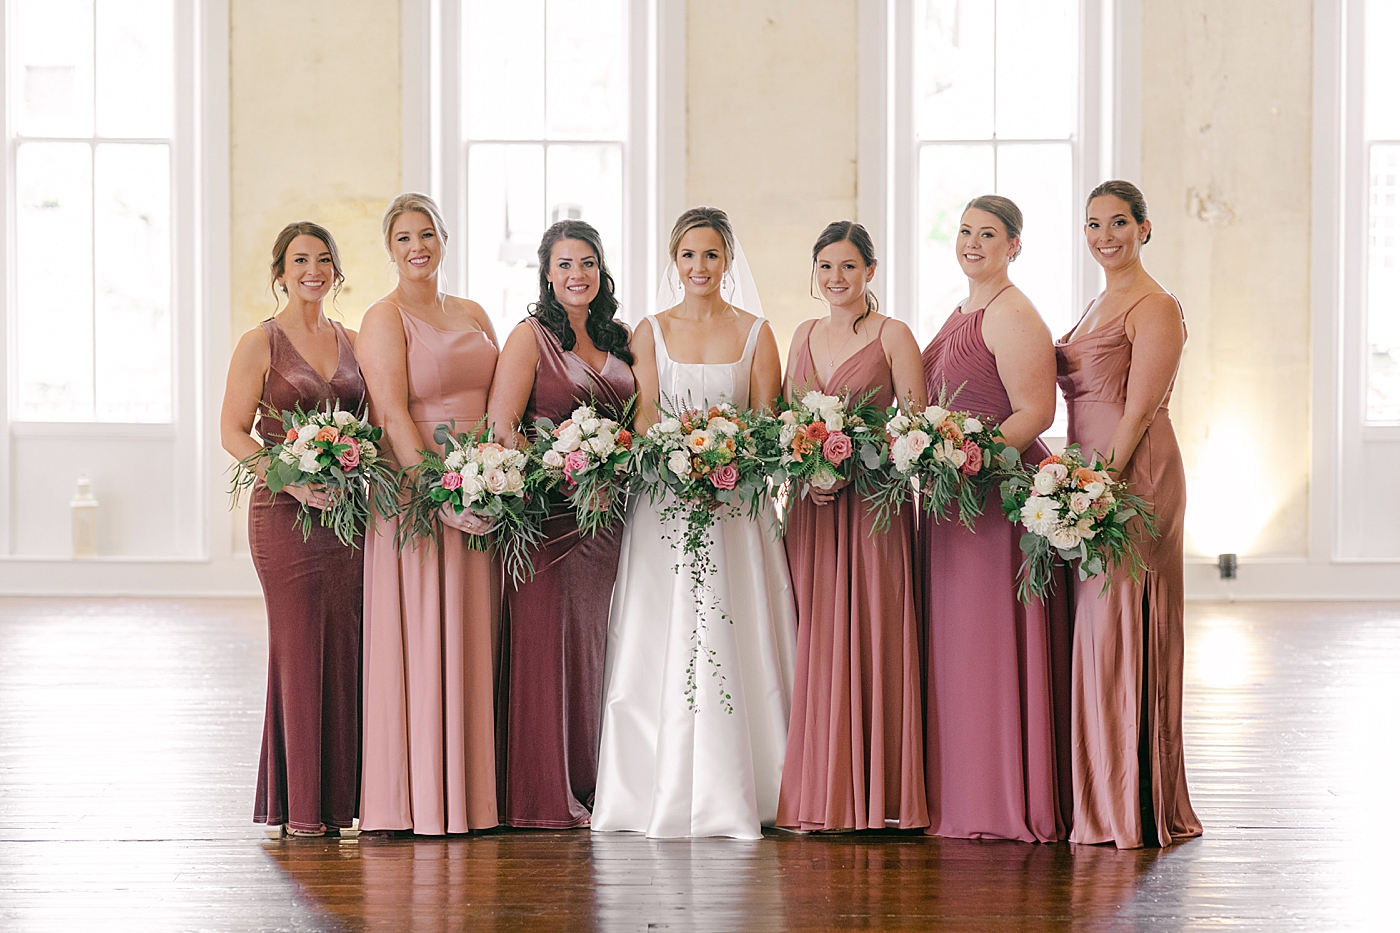 Bride portraits with bridesmaids | Photo by Hope Helmuth Photography